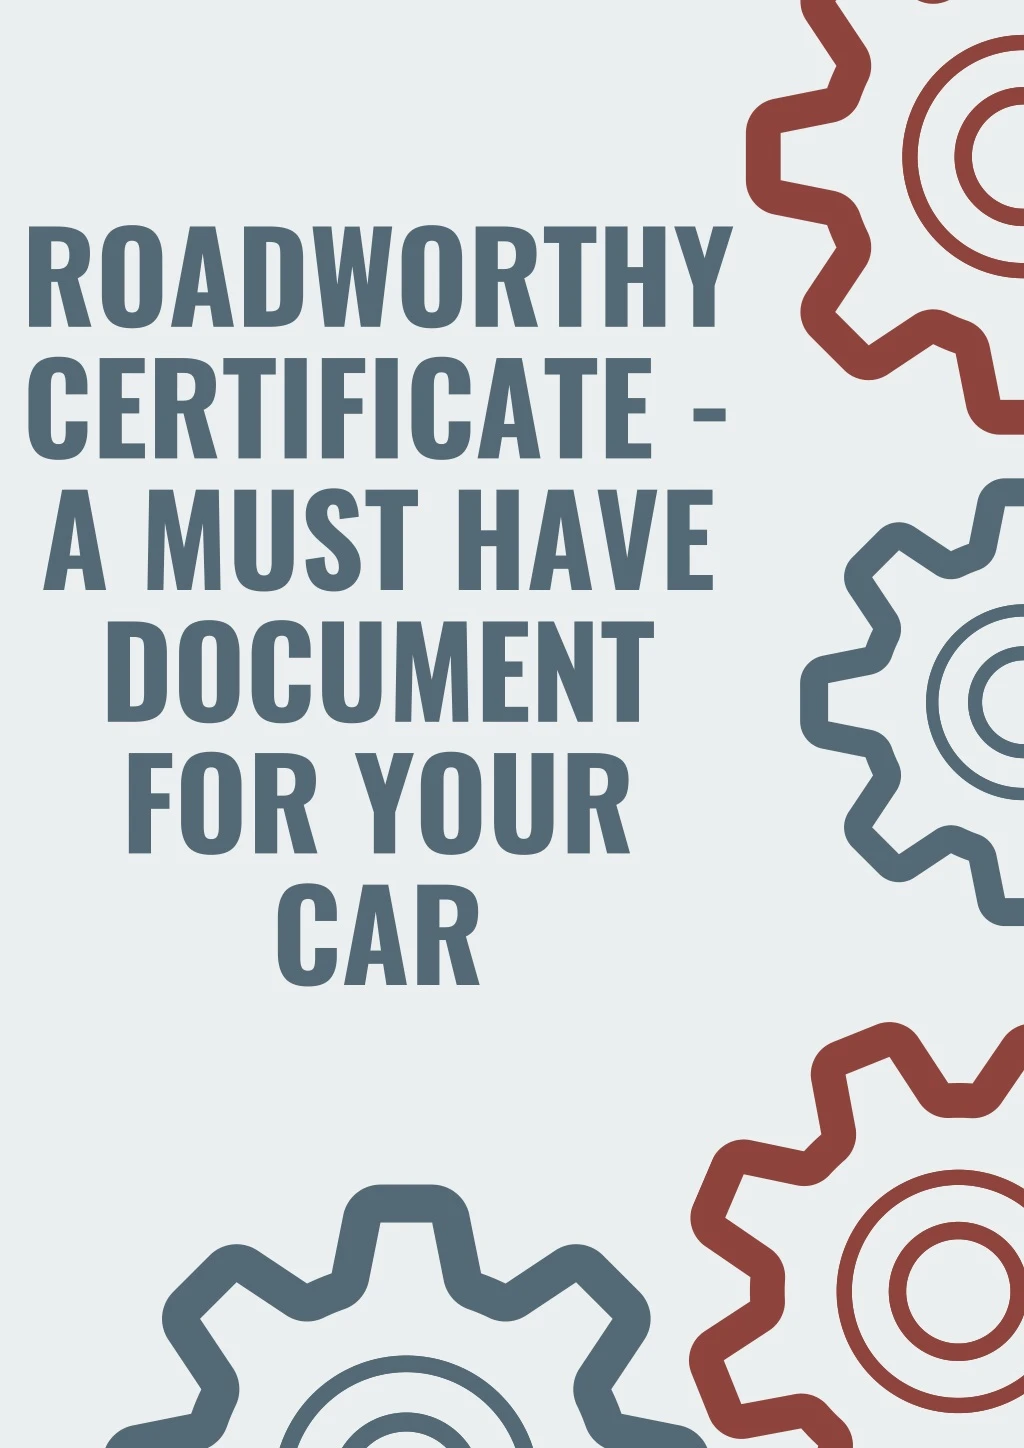 roadworthy certificate a must have document